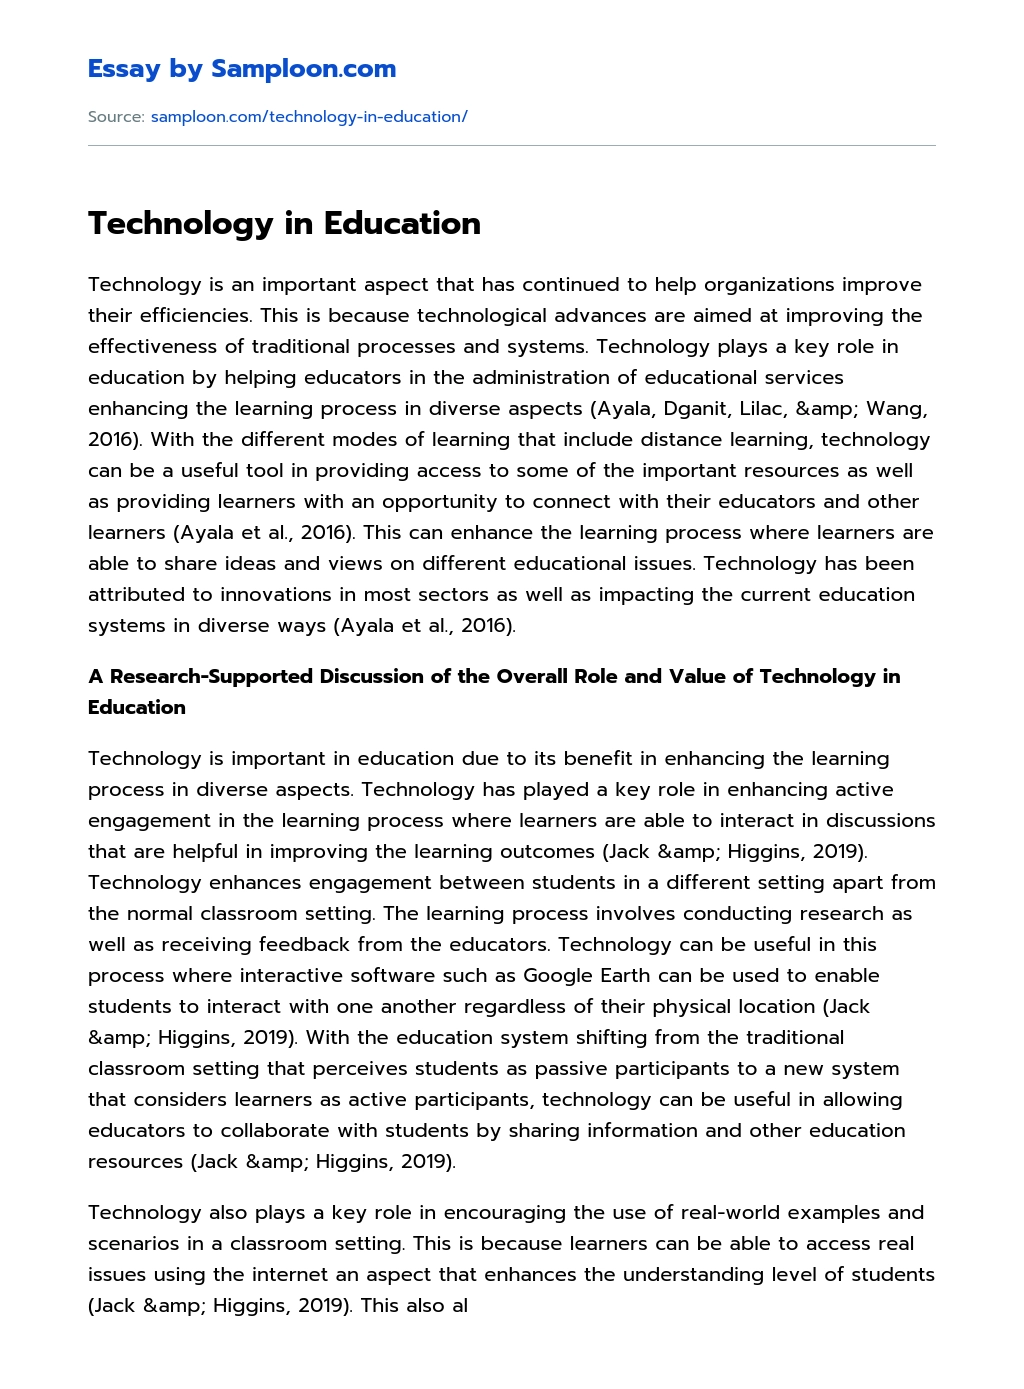 Role and Value of Technology in Education essay